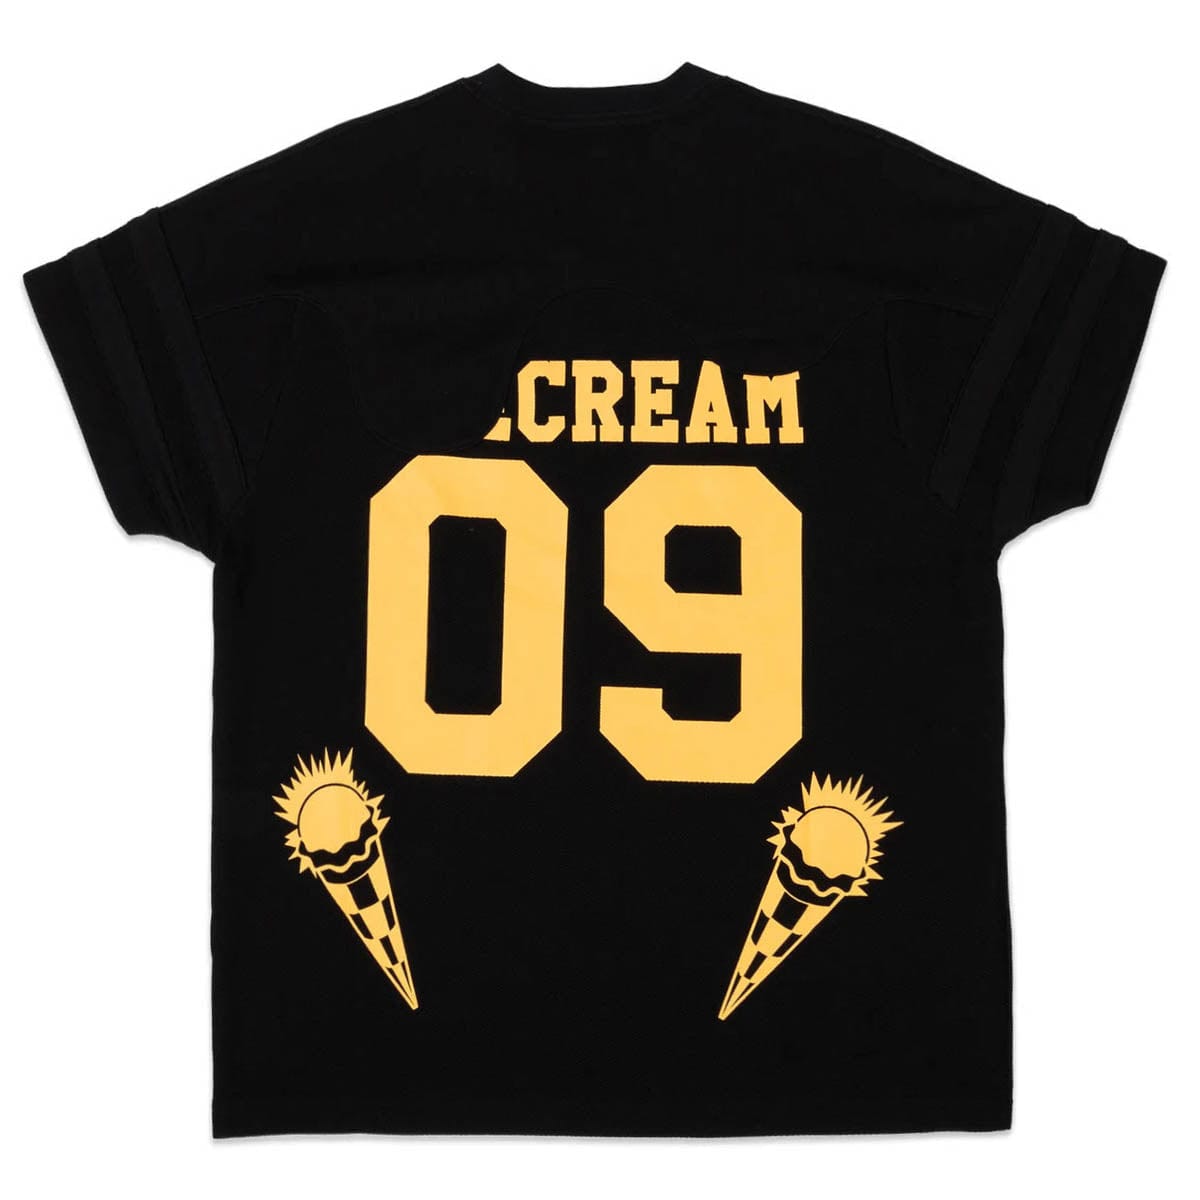 ICECREAM T-Shirts END CONE JERSEY